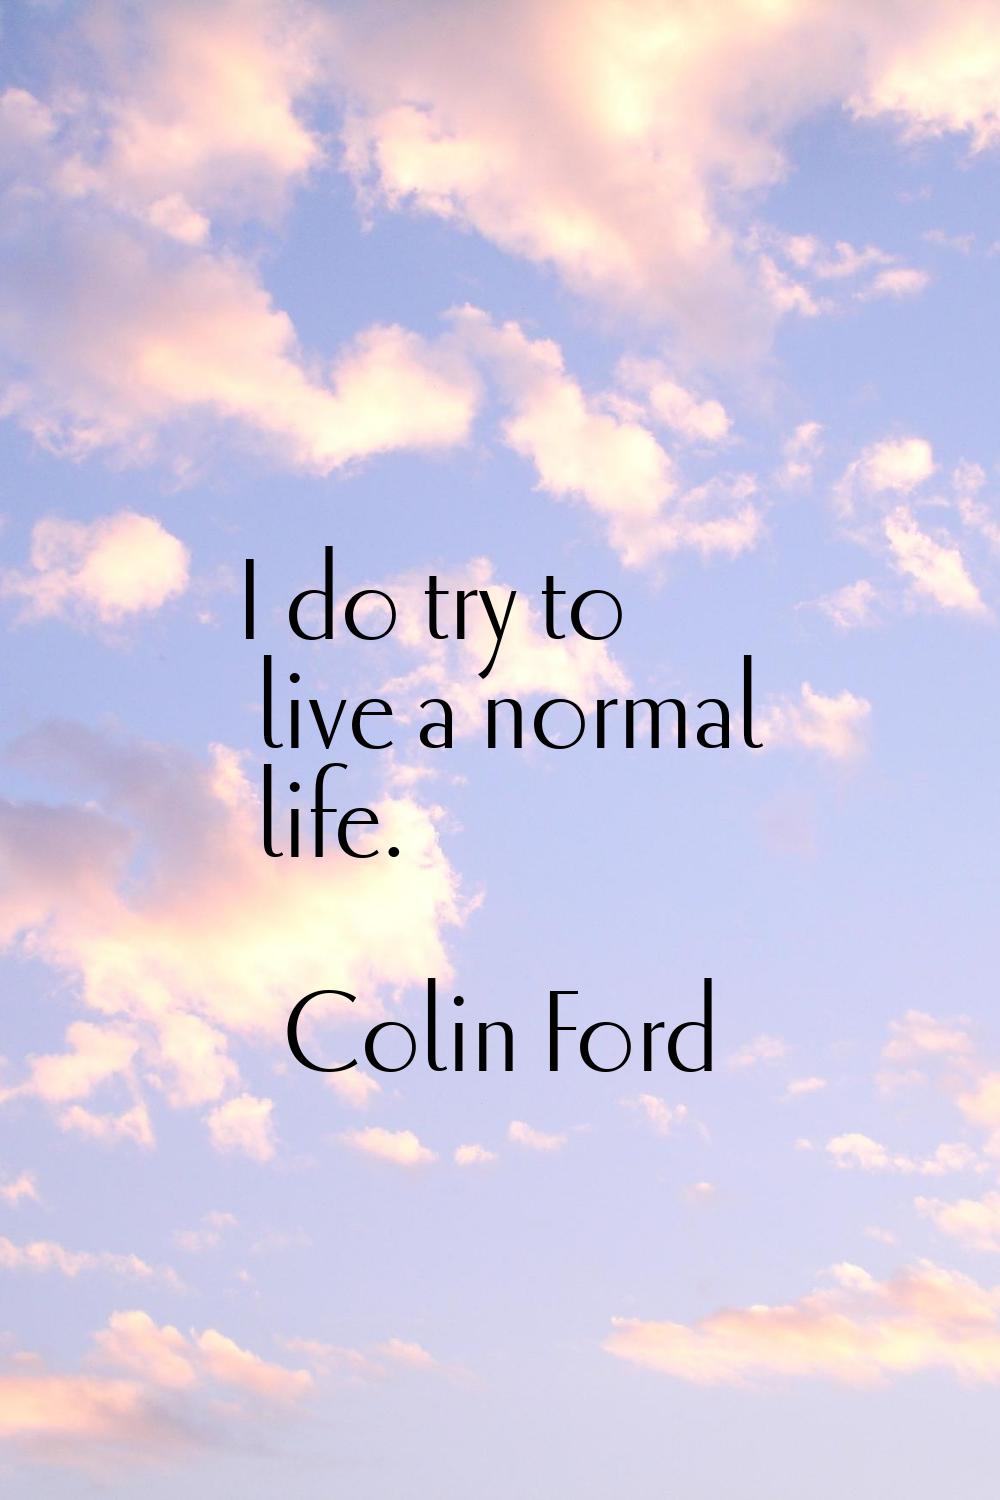 I do try to live a normal life.